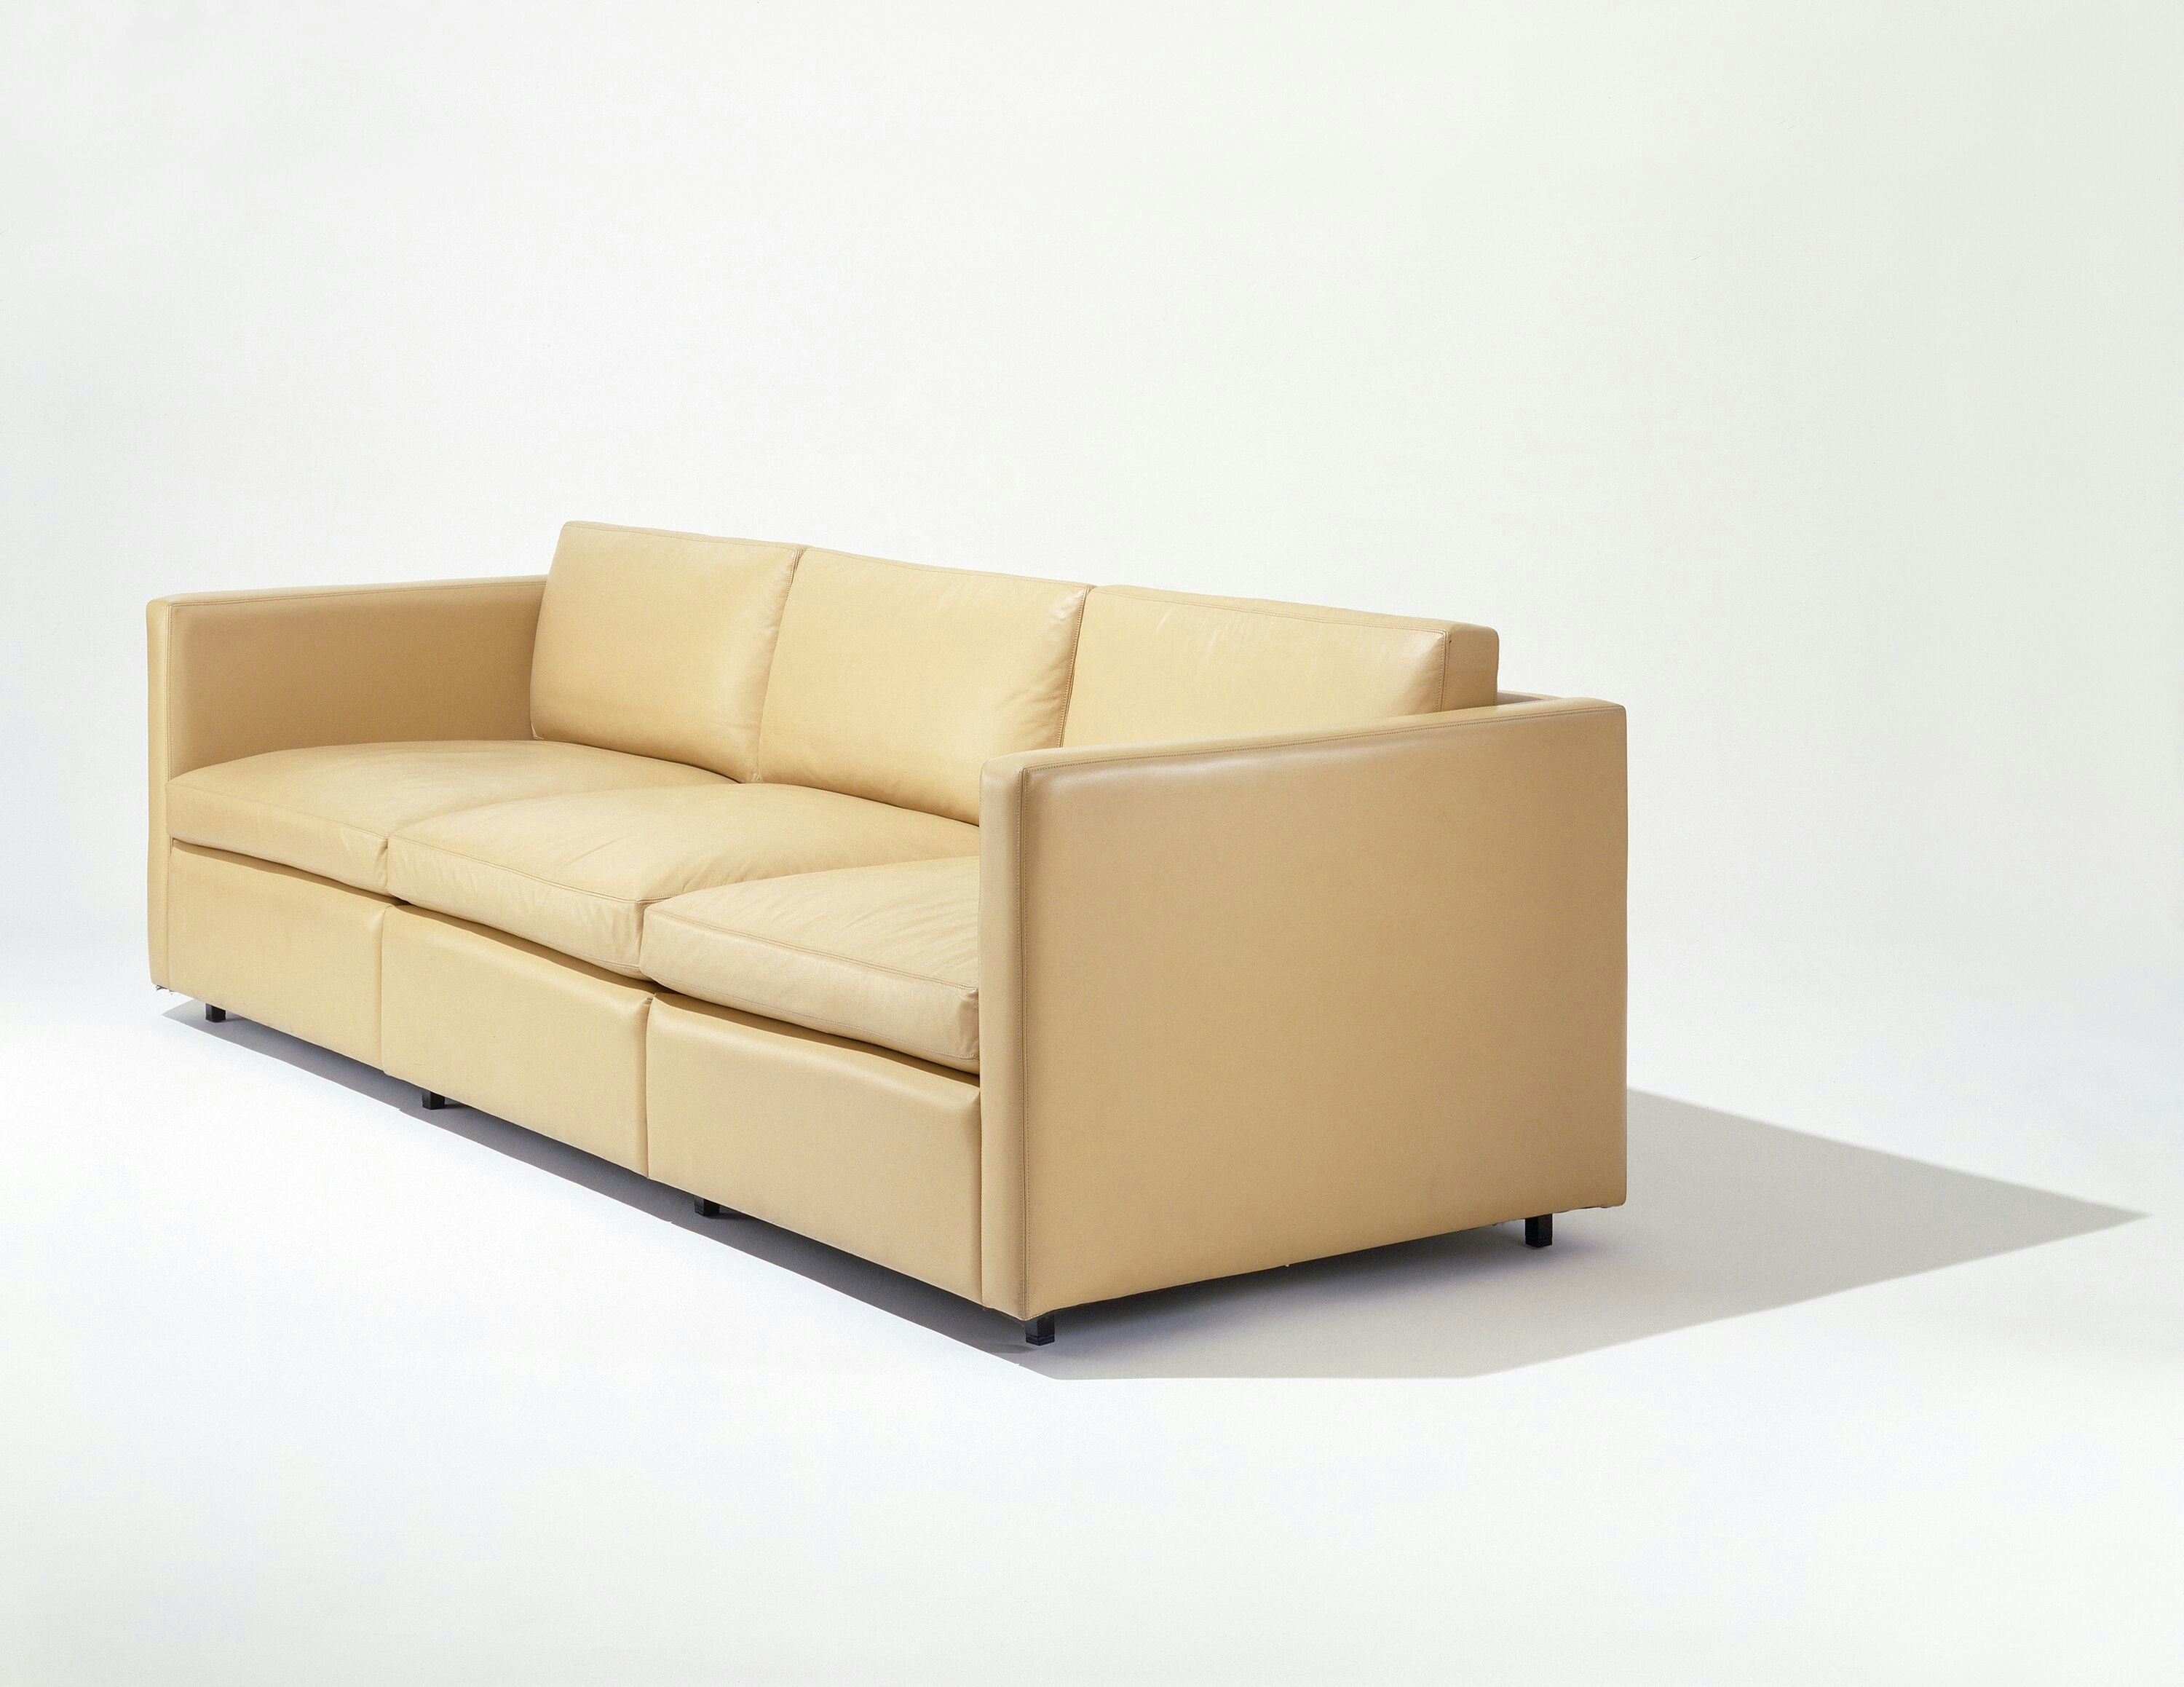 Knoll Charles Pfister Collection レザーソファ - ソファ